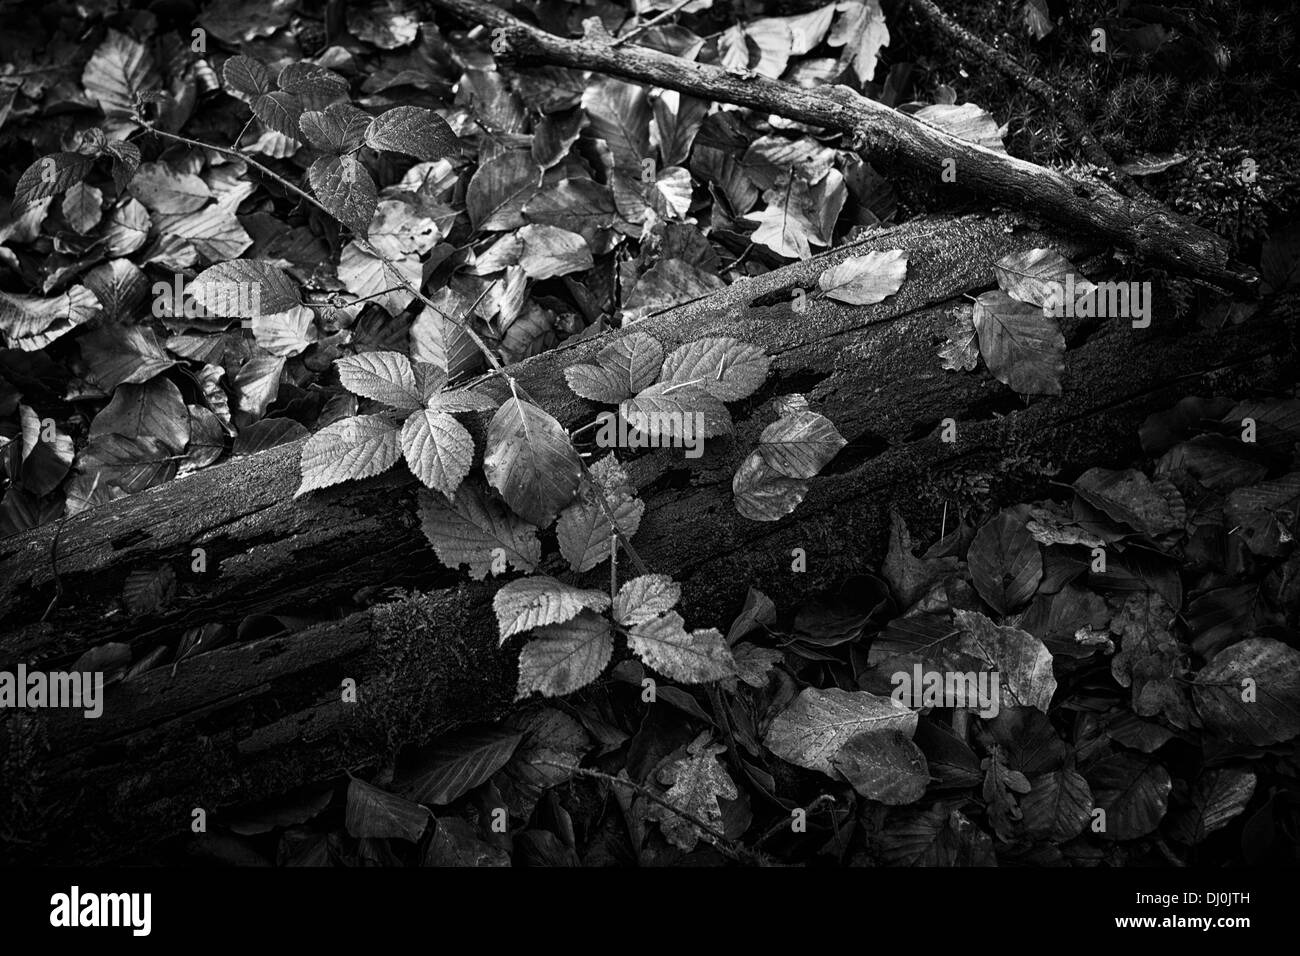 Gloomy autumn  landscape in a wood black and white Stock Photo